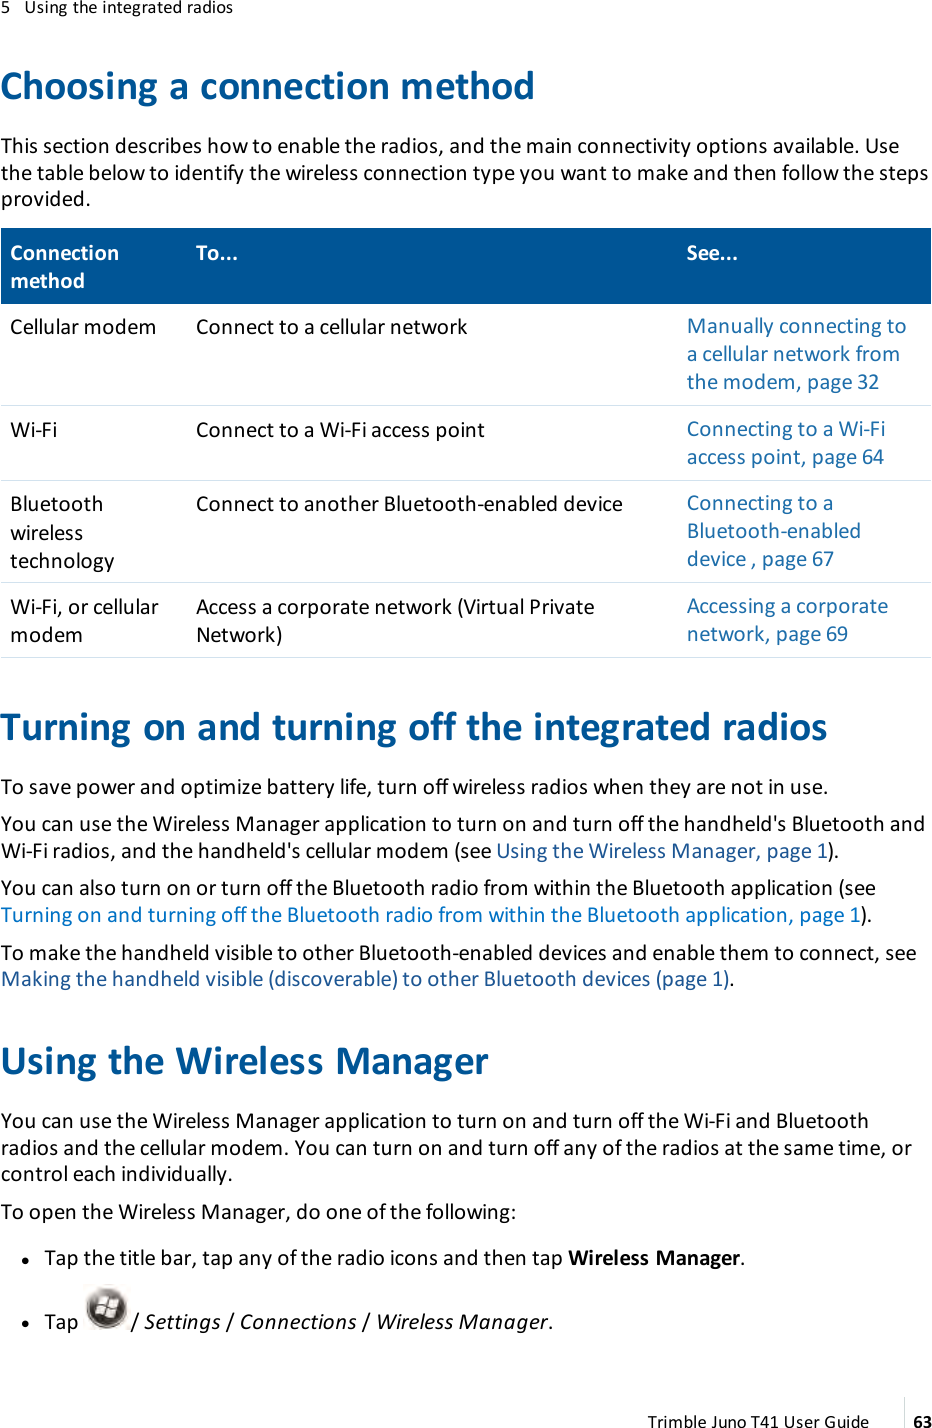 5 Using the integrated radiosChoosing a connection methodThis section describes how to enable the radios, and the main connectivity options available. Usethe table below to identify the wireless connection type you want to make and then follow the stepsprovided.ConnectionmethodTo... See...Cellular modem Connect to a cellular network Manually connecting toa cellular network fromthe modem, page 32Wi-Fi Connect to a Wi-Fi access point Connecting to a Wi-Fiaccess point, page 64BluetoothwirelesstechnologyConnect to another Bluetooth-enabled device Connecting to aBluetooth-enableddevice , page 67Wi-Fi, or cellularmodemAccess a corporate network (Virtual PrivateNetwork)Accessing a corporatenetwork, page 69Turning on and turning off the integrated radiosTo save power and optimize battery life, turn off wireless radios when they are not in use.You can use the Wireless Manager application to turn on and turn off the handheld&apos;s Bluetooth andWi-Fi radios, and the handheld&apos;s cellular modem (see Using the Wireless Manager, page 1).You can also turn on or turn off the Bluetooth radio from within the Bluetooth application (seeTurning on and turning off the Bluetooth radio from within the Bluetooth application, page 1).To make the handheld visible to other Bluetooth-enabled devices and enable them to connect, seeMaking the handheld visible (discoverable) to other Bluetooth devices (page 1).Using the Wireless ManagerYou can use the Wireless Manager application to turn on and turn off the Wi-Fi and Bluetoothradios and the cellular modem. You can turn on and turn off any of the radios at the same time, orcontrol each individually.To open the Wireless Manager, do one of the following:lTap the title bar, tap any of the radio icons and then tap Wireless Manager.lTap /Settings/Connections/Wireless Manager.Trimble Juno T41 User Guide 63